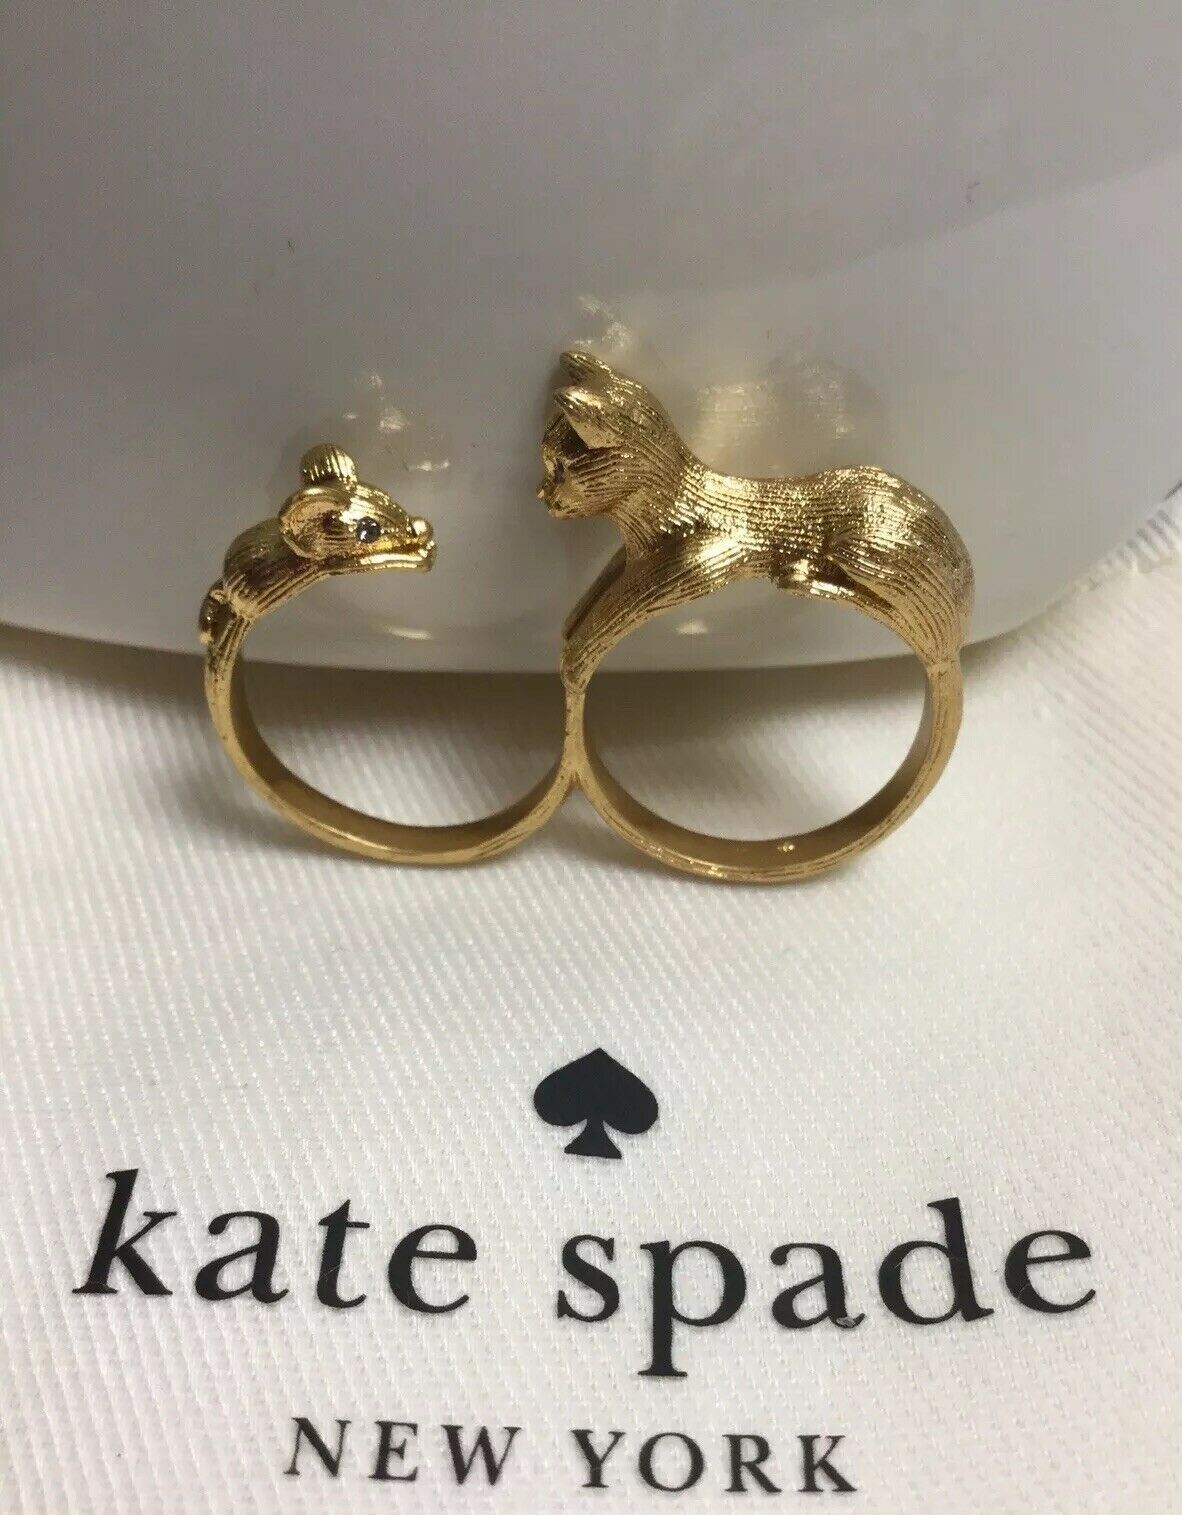 Primary image for Kate Spade New York House Cat And Mouse Ring Size 7 w/ KS Dust Bag New